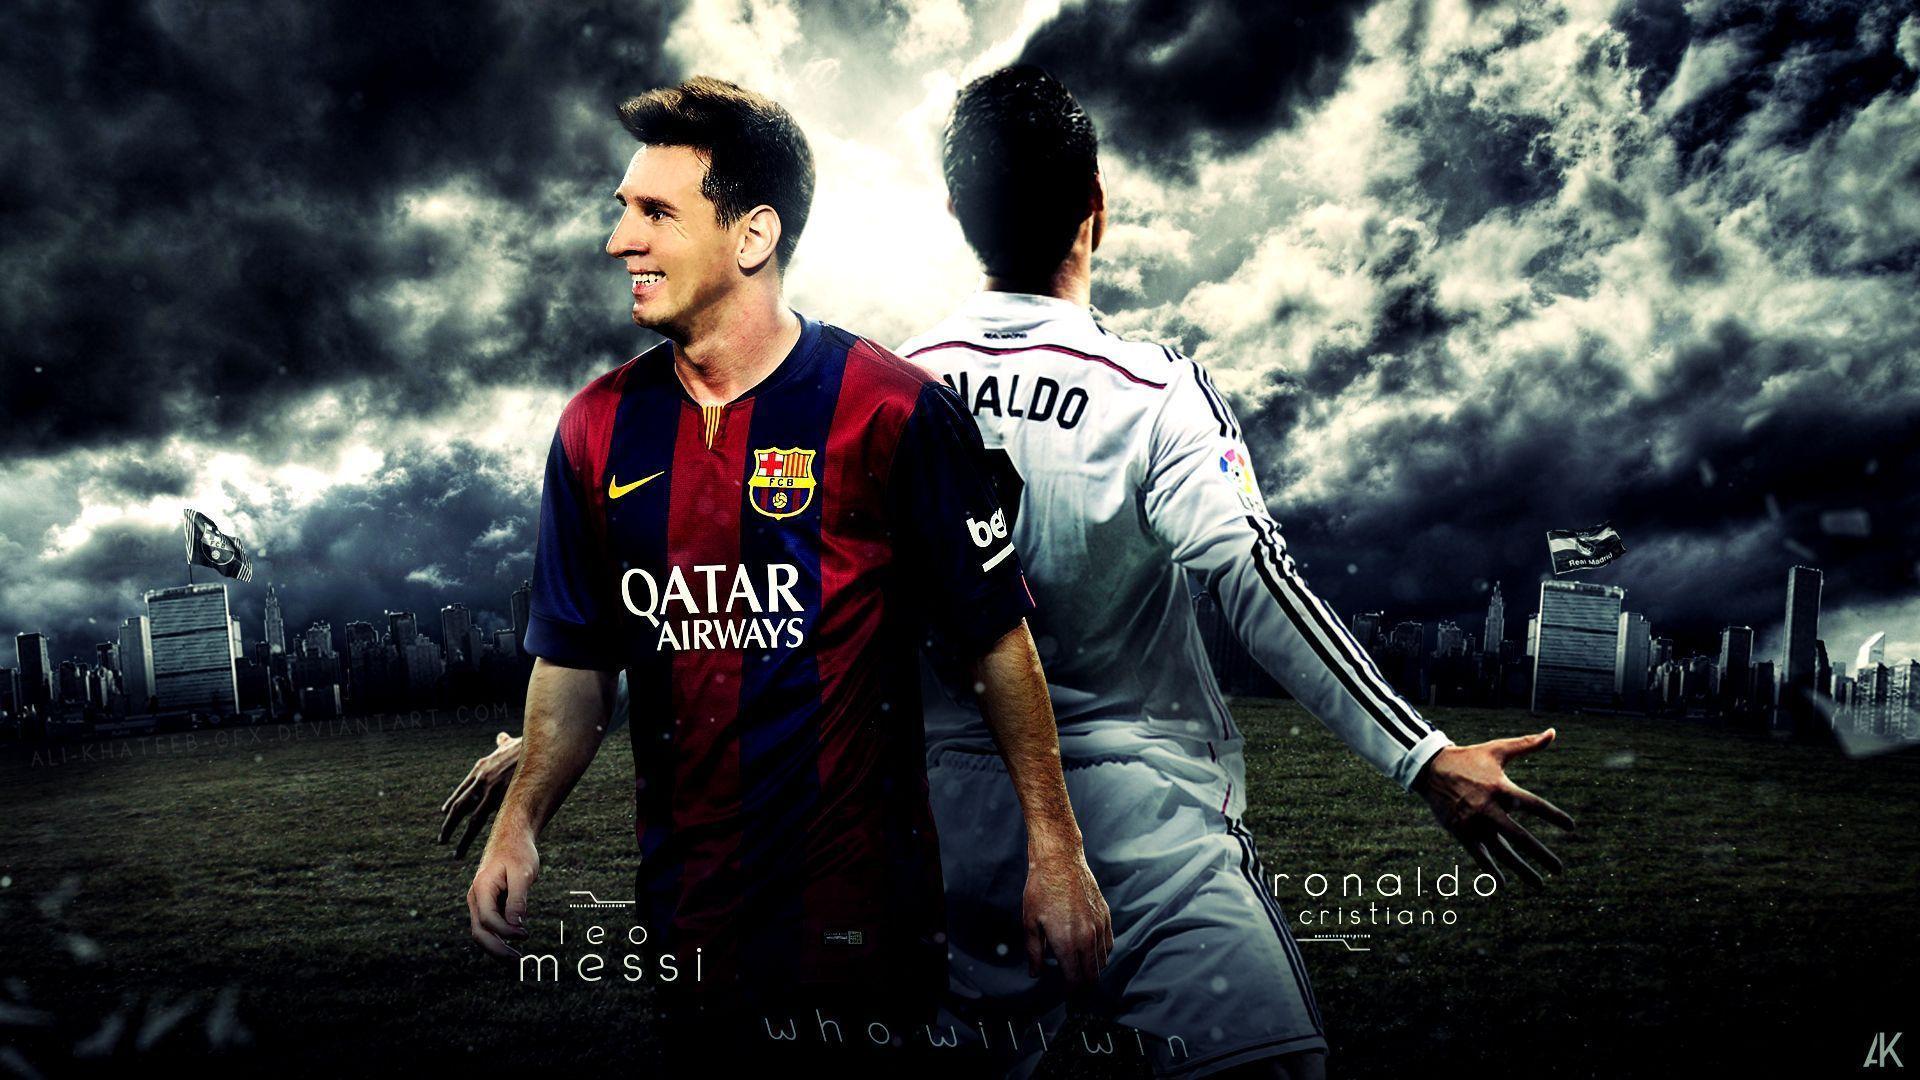 Cristiano_ronaldo_and_leo_messi Wallpapers: Players, Teams